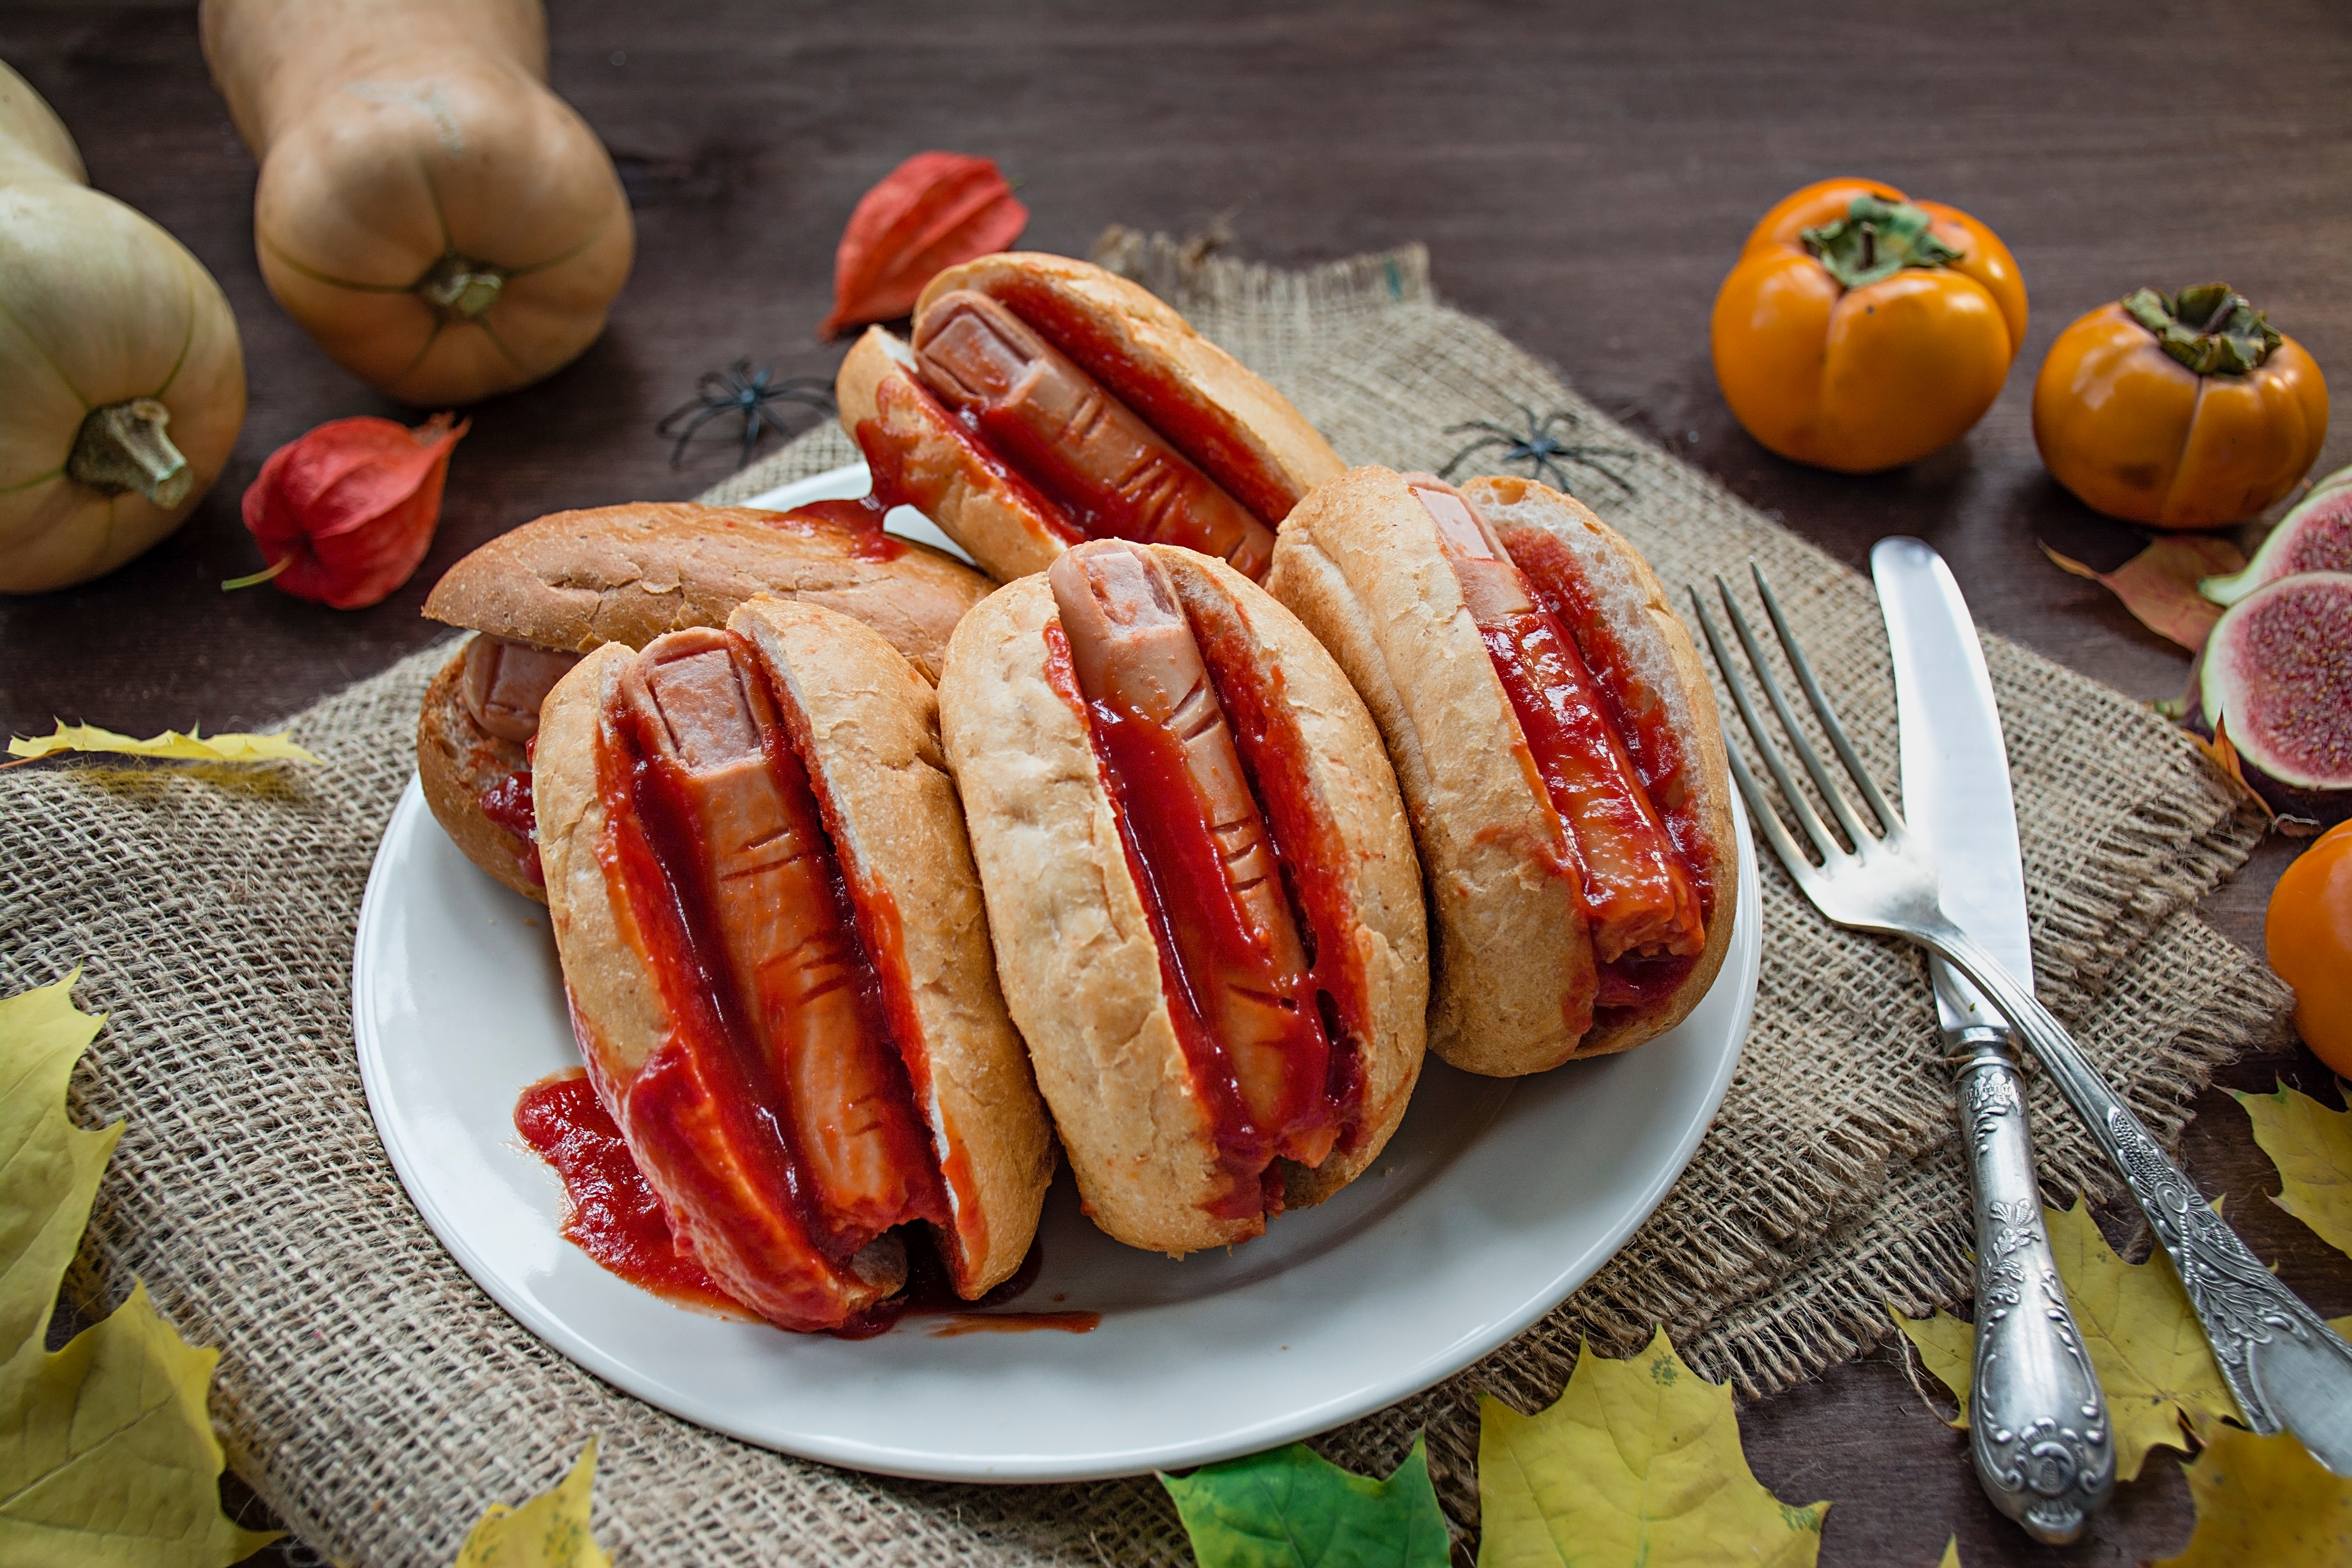 Hot dog fingers for your next Halloween mystery party. 